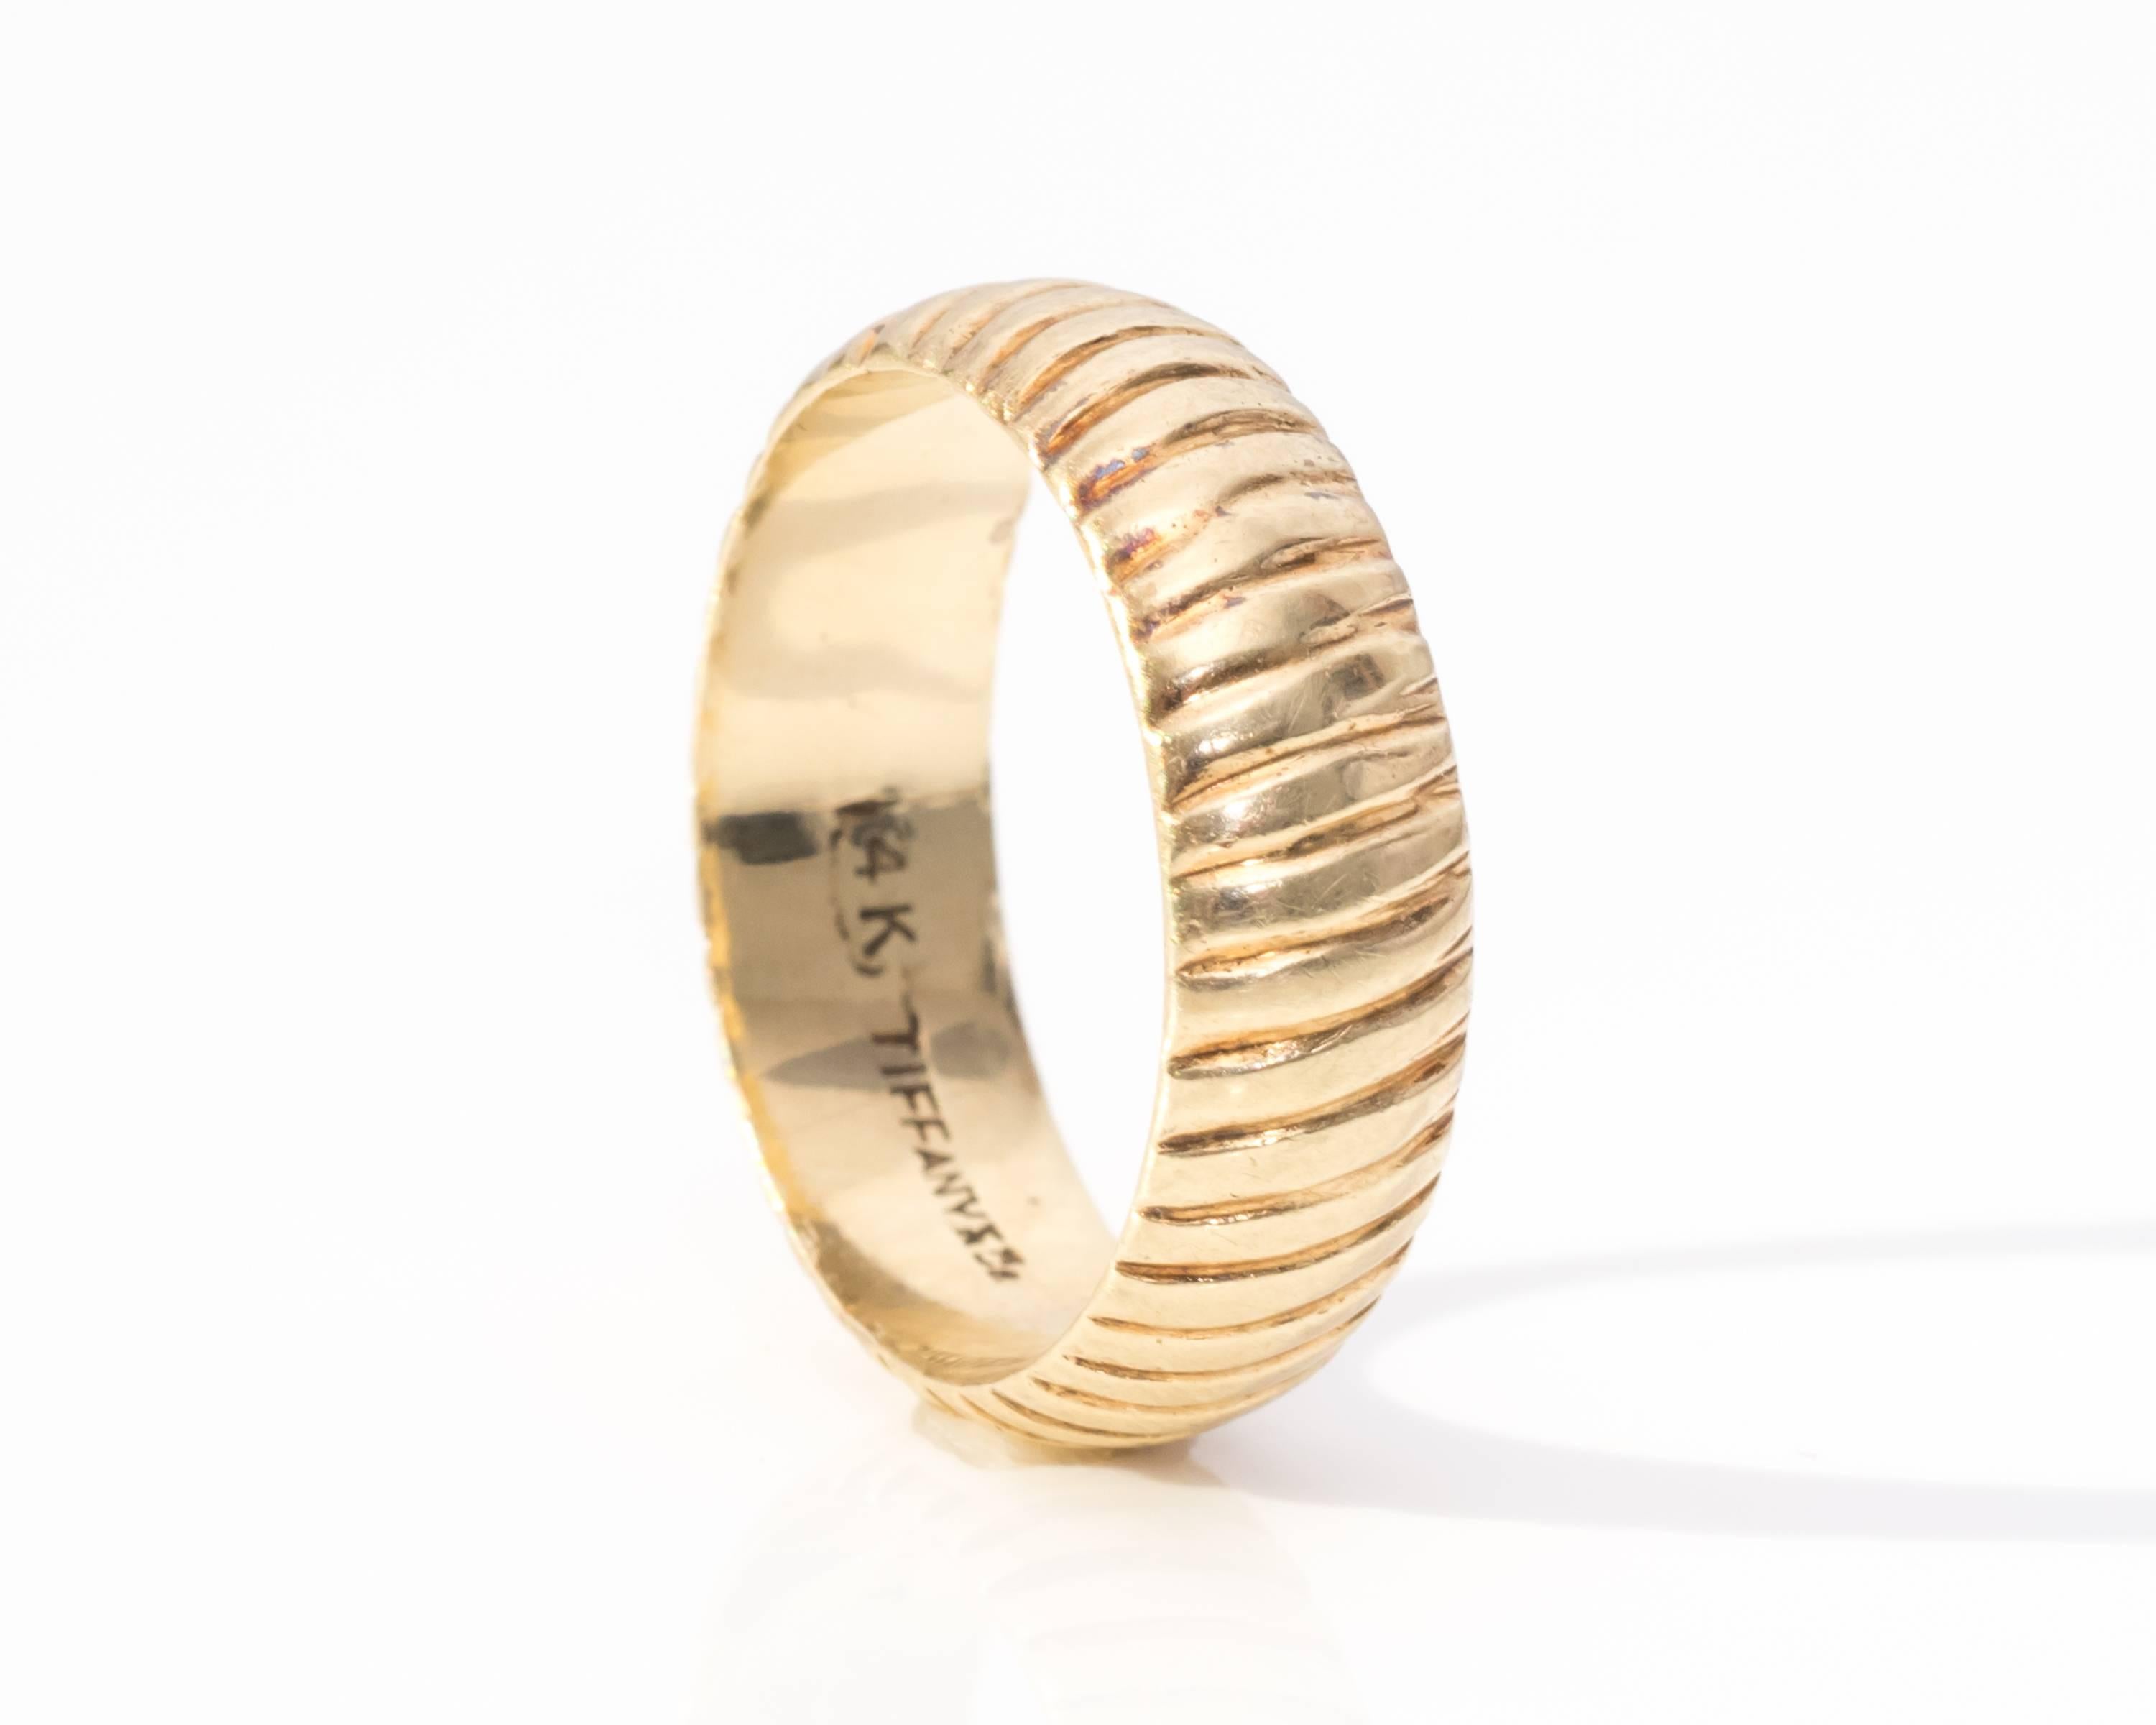 1970s Tiffany & Co. Yellow Gold Ring Band
Fits Ring Size 5.5 (cannot be resized, but can be worn on any finger)
Features a Unique Ribbed Pattern Around the Band
Hallmarked 